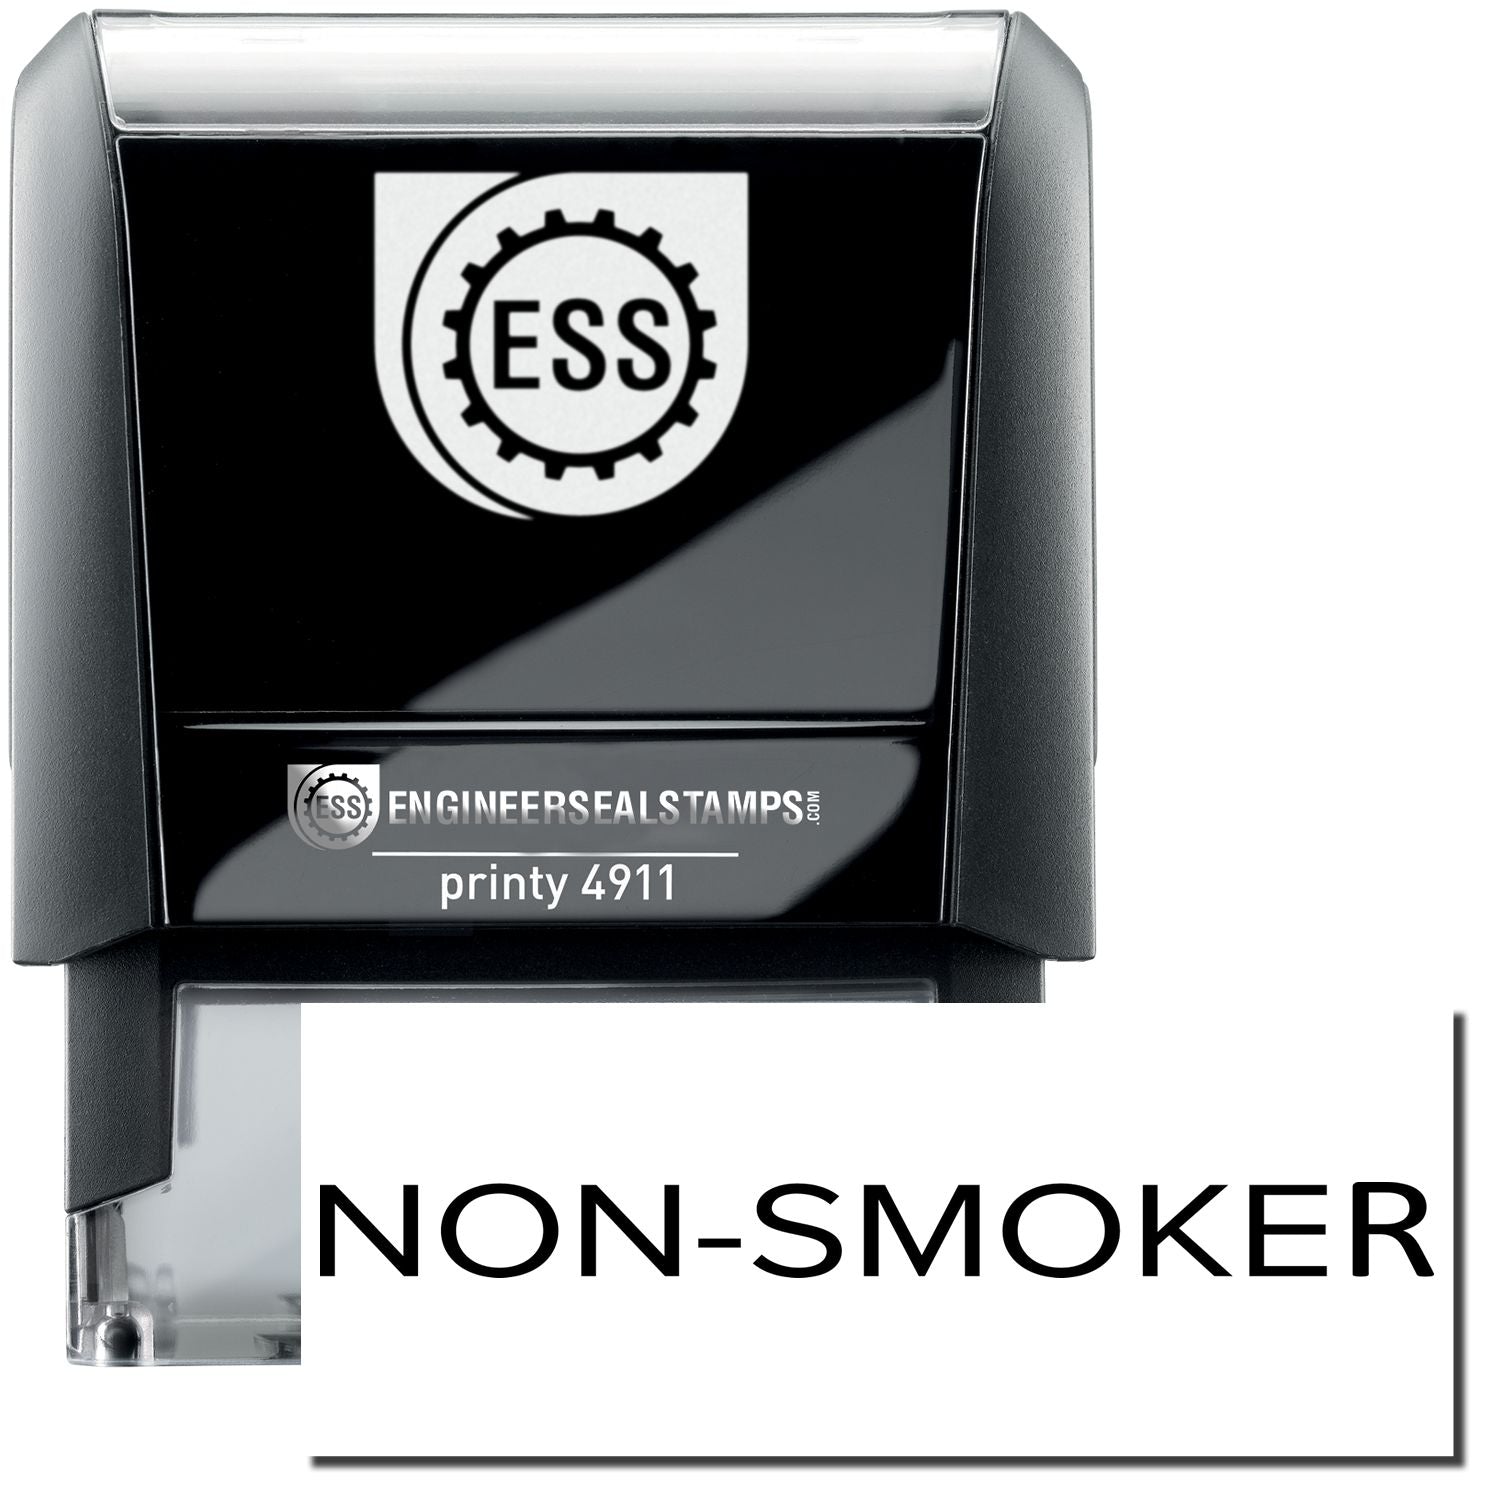 A self-inking stamp with a stamped image showing how the text "NON-SMOKER" in a narrow font is displayed after stamping.